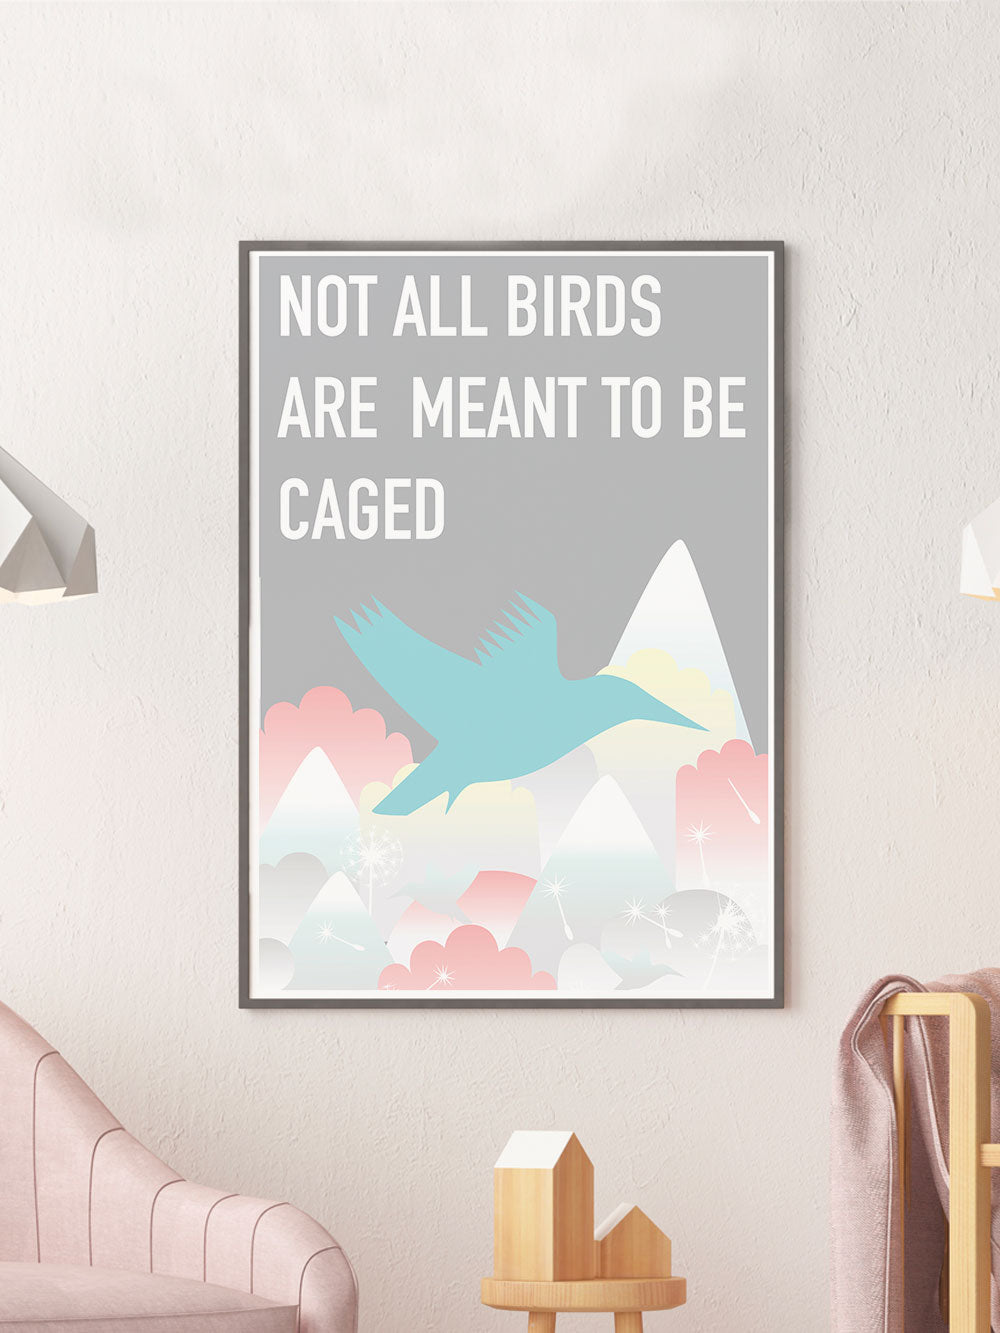 Caged Bird Art Print in a frame on a wall